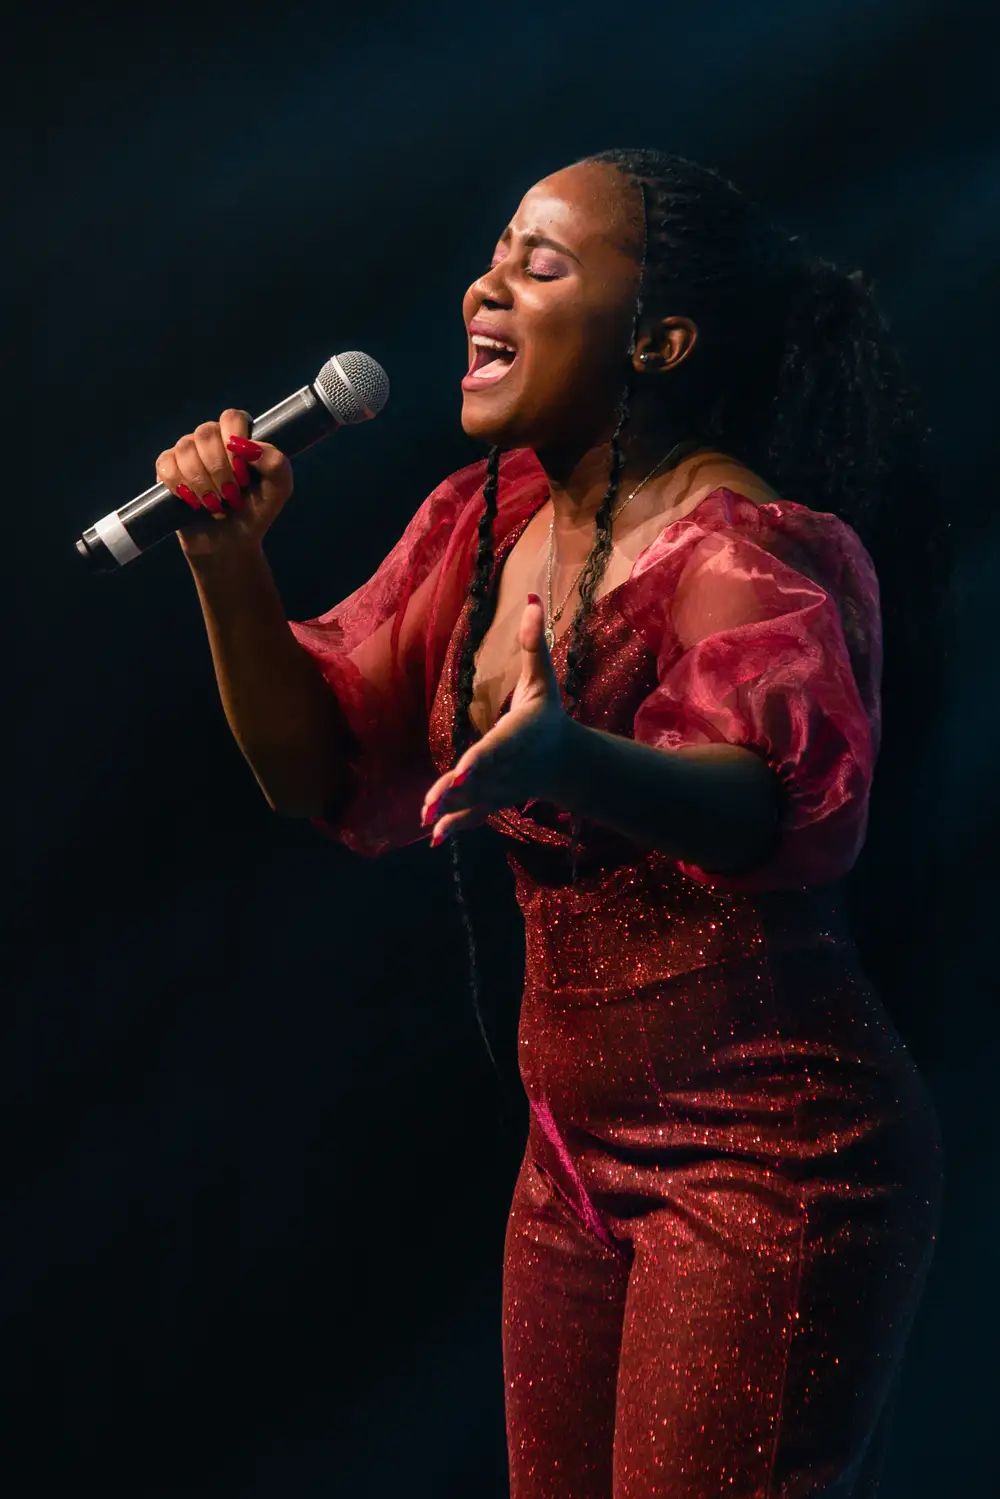 woman in red singing